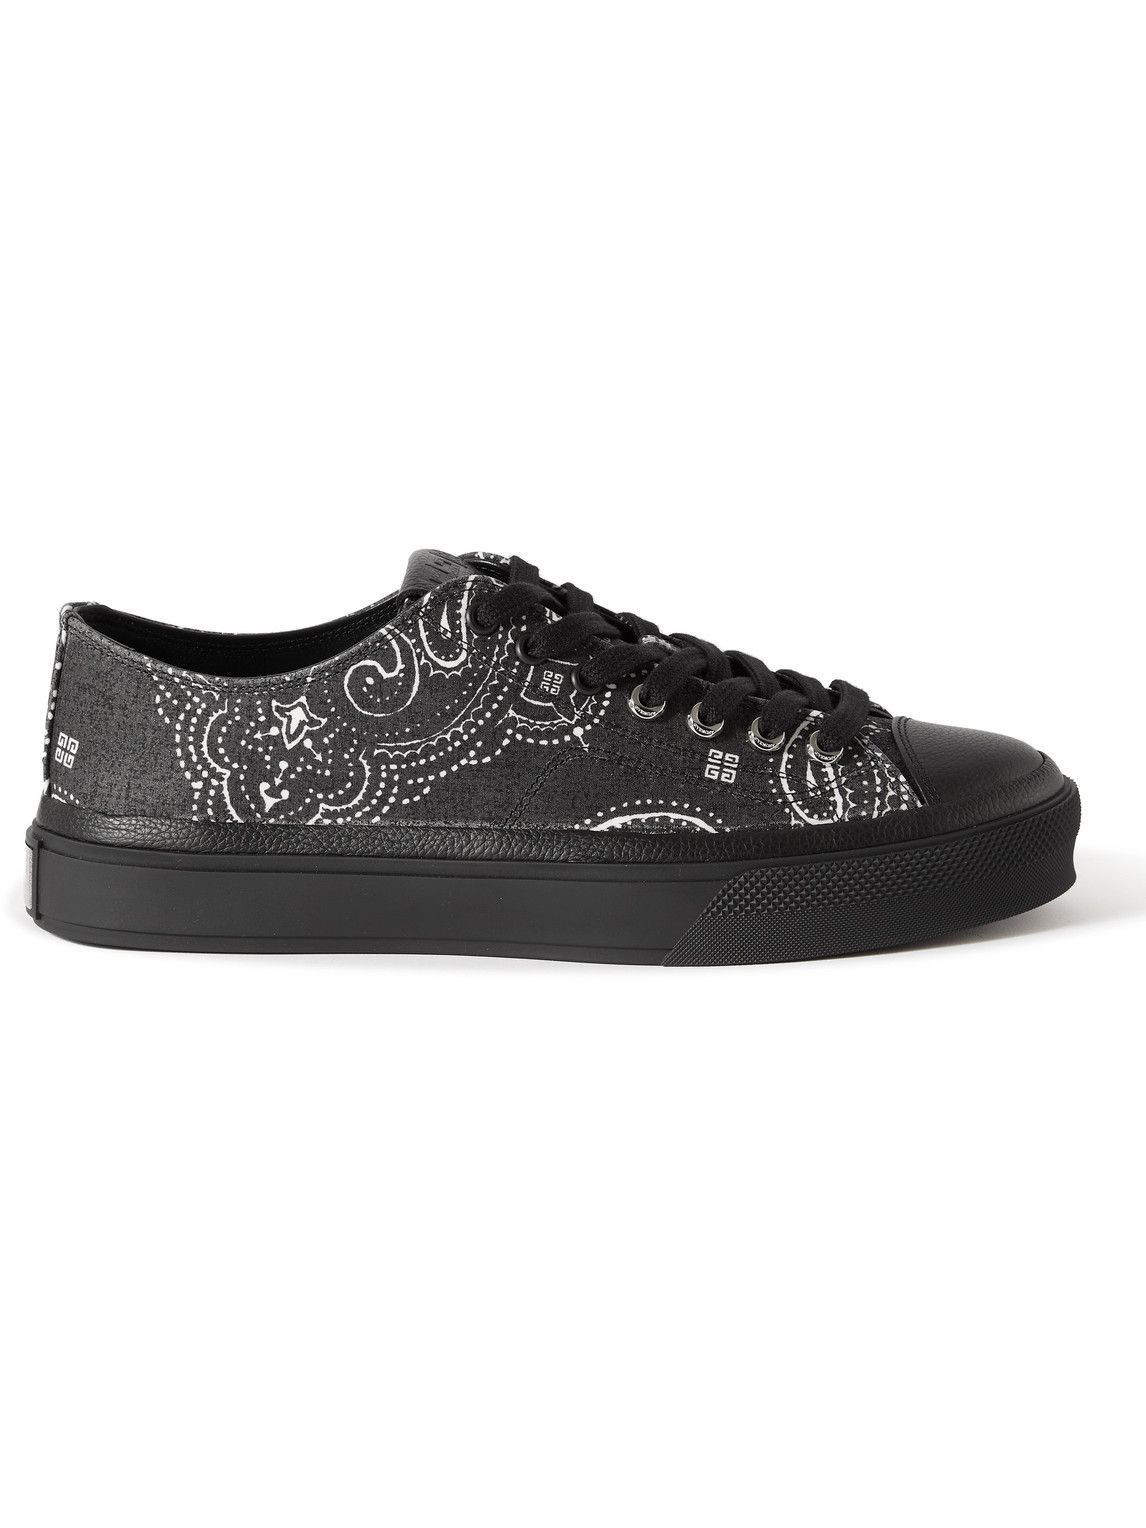 Givenchy - City Leather-Trimmed Bandana-Print Canvas Sneakers - Black ...